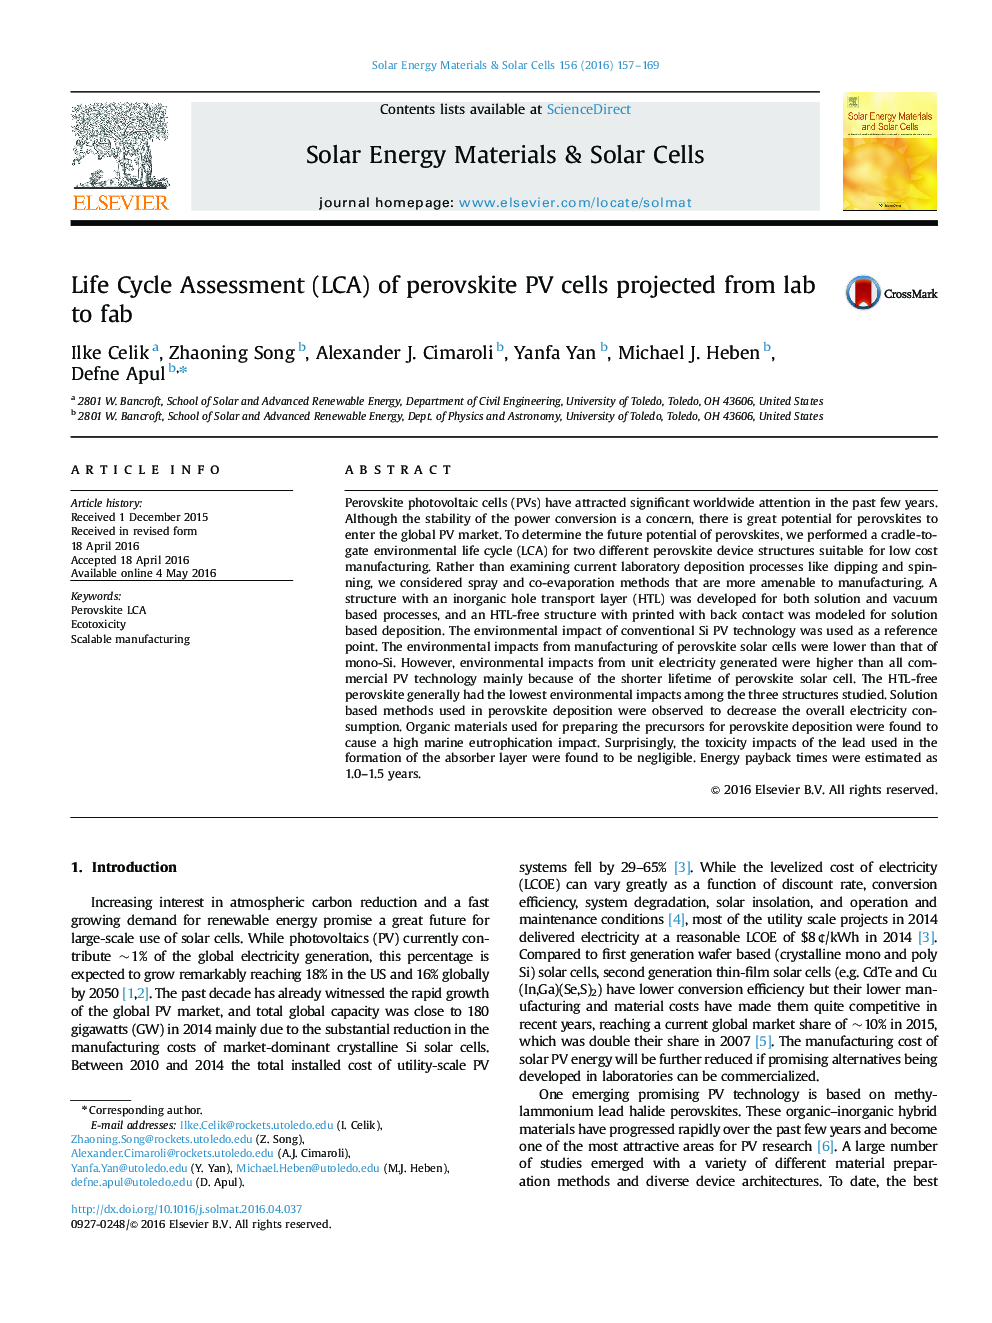 Life Cycle Assessment (LCA) of perovskite PV cells projected from lab to fab